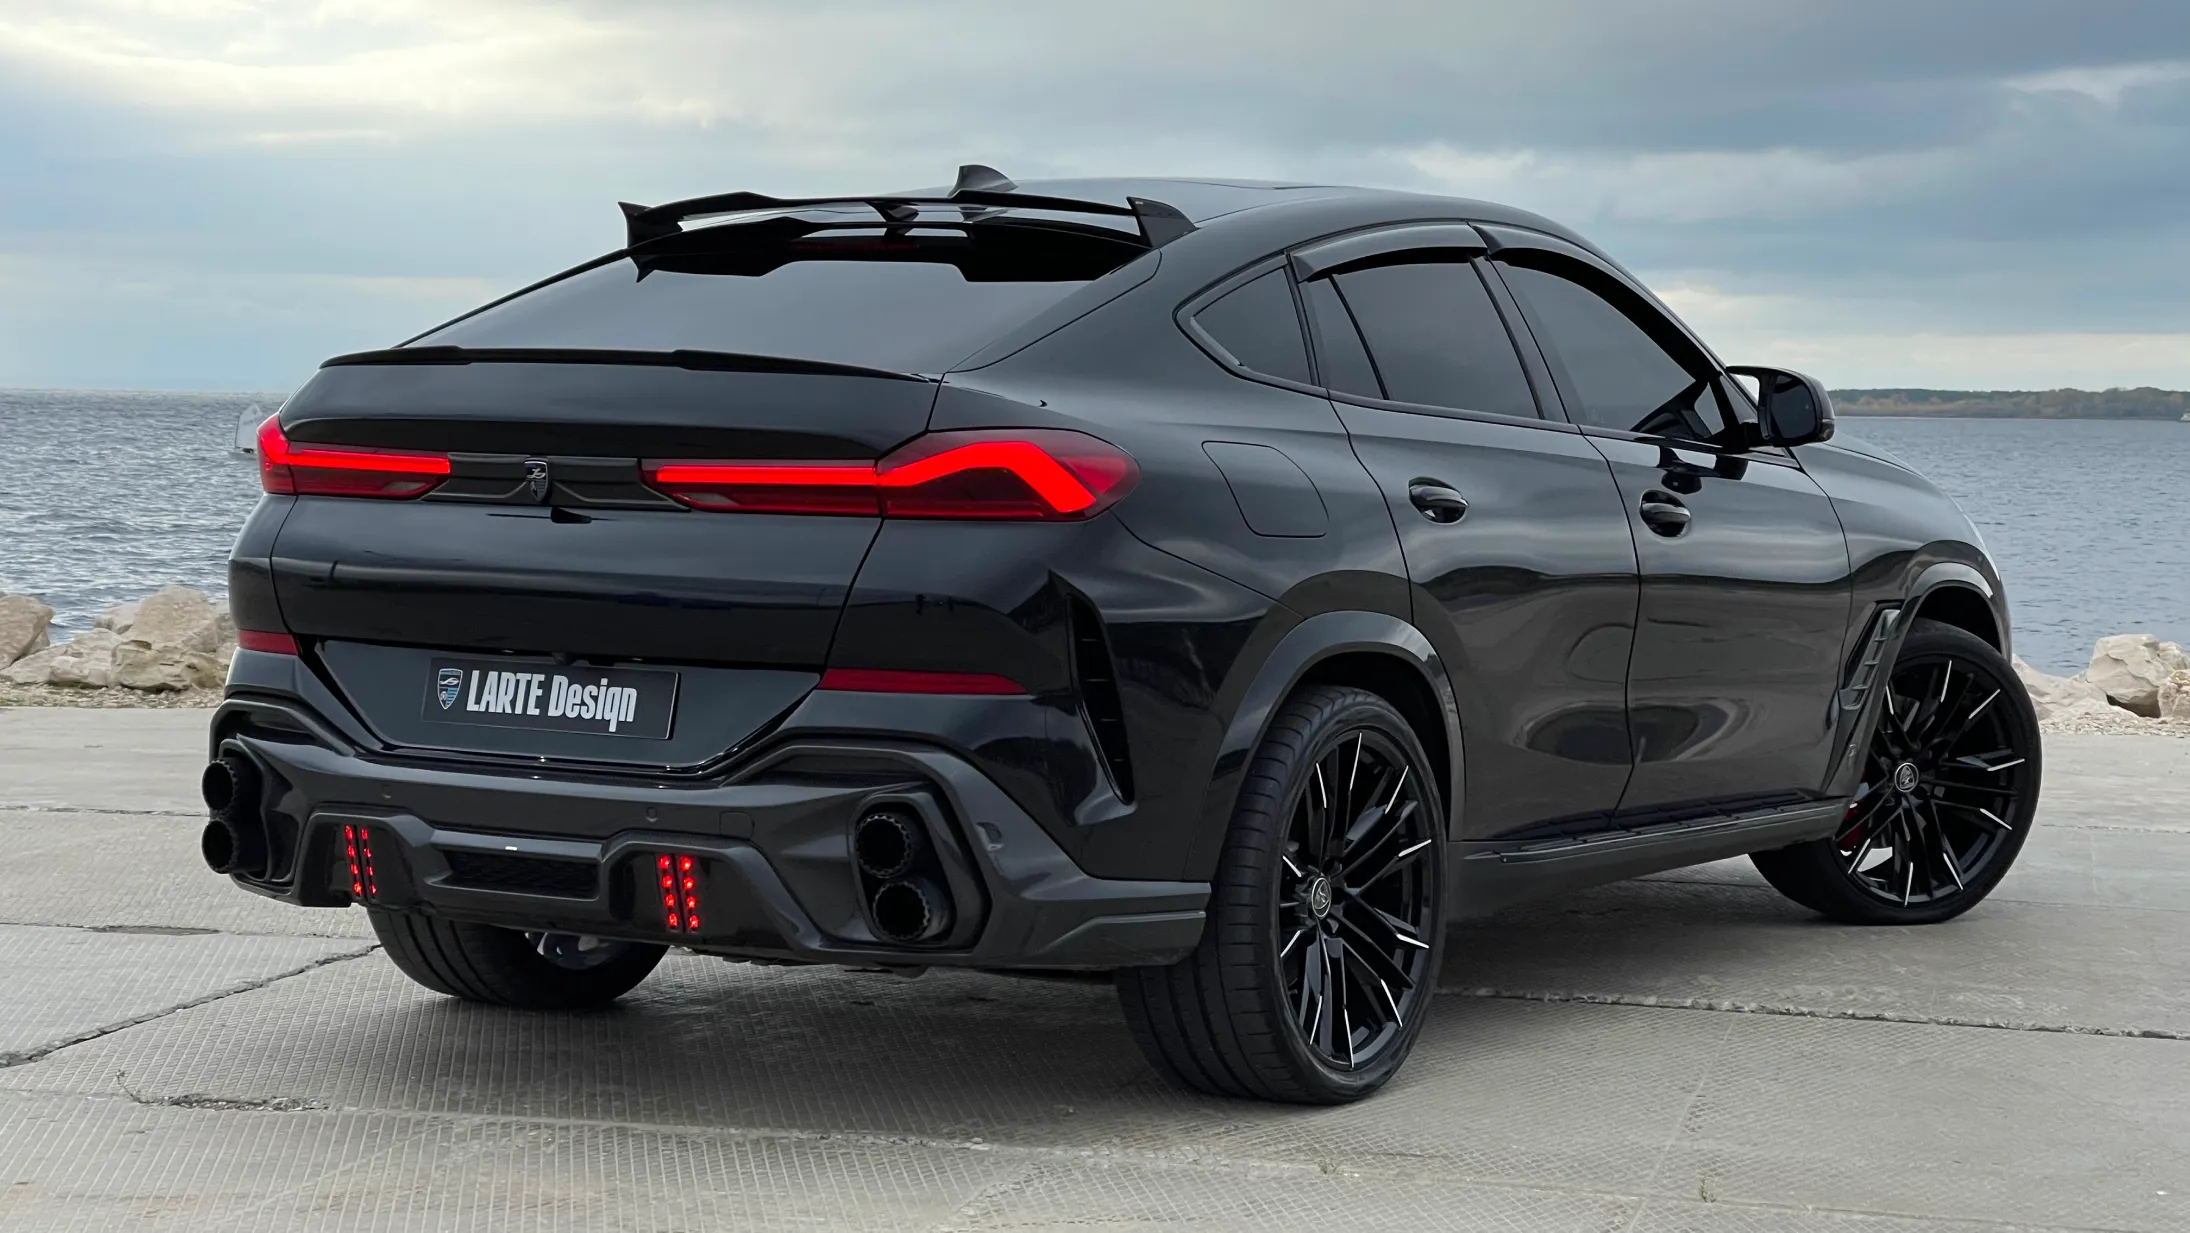 Rear angle view on a BMW X6 with a body kit giving the car a custom appearance